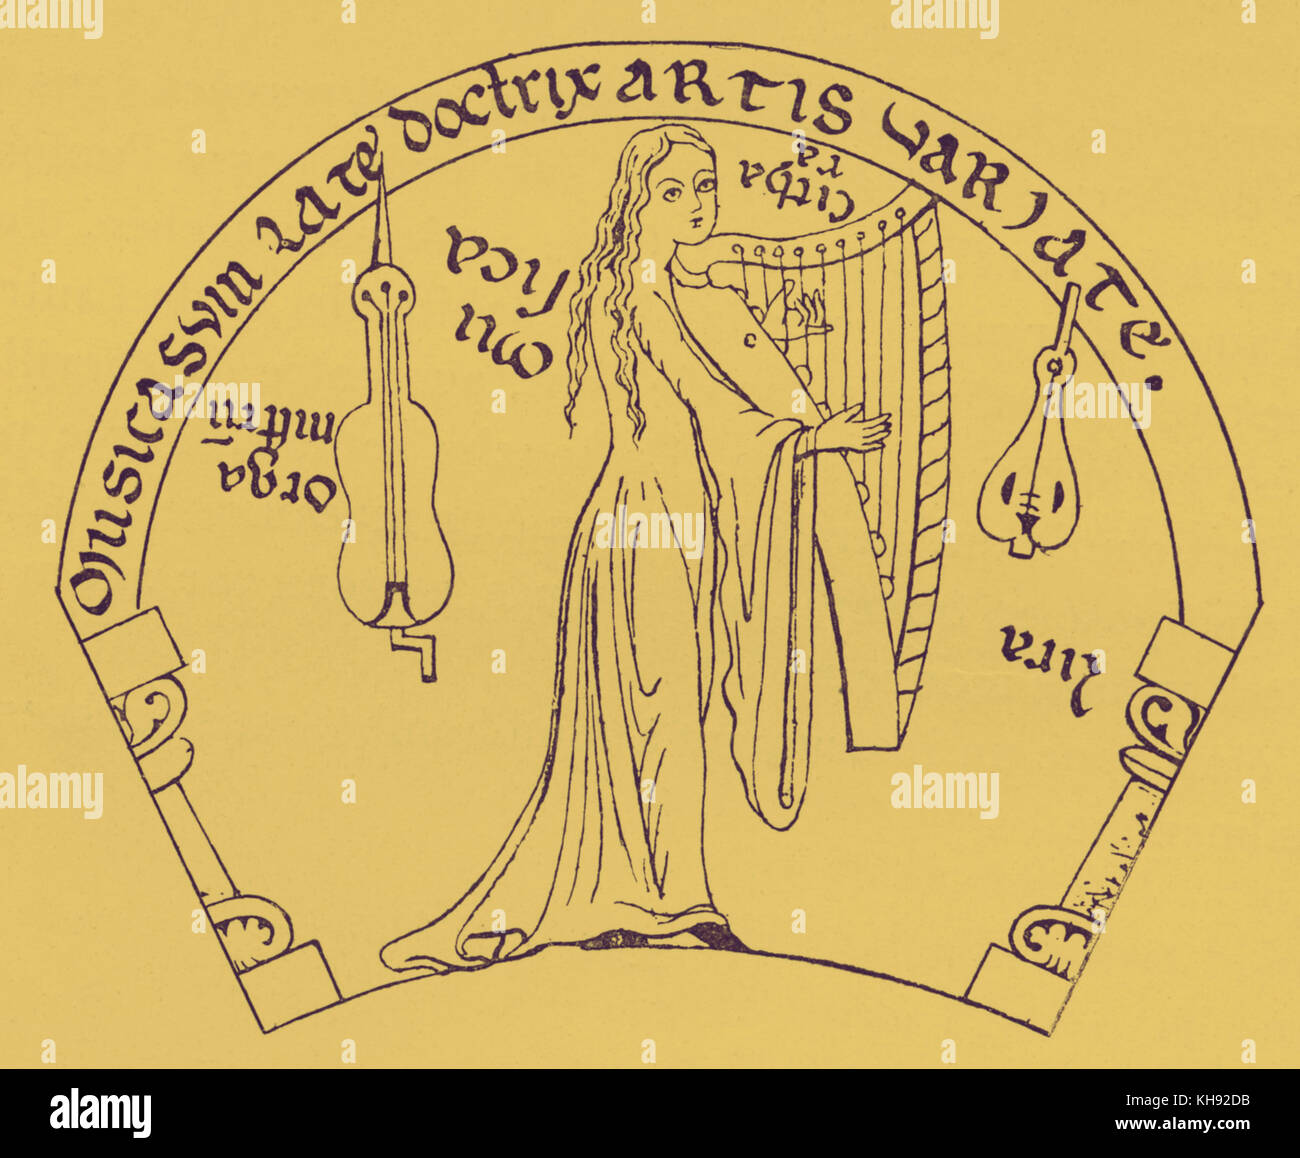 Female Musician Playing Harp ('Cythara') - pictured with  with organistrum (left) and lyra. Organistrum, early version of hurdy gurdy. From illustration in 12th century manuscript. Stock Photo